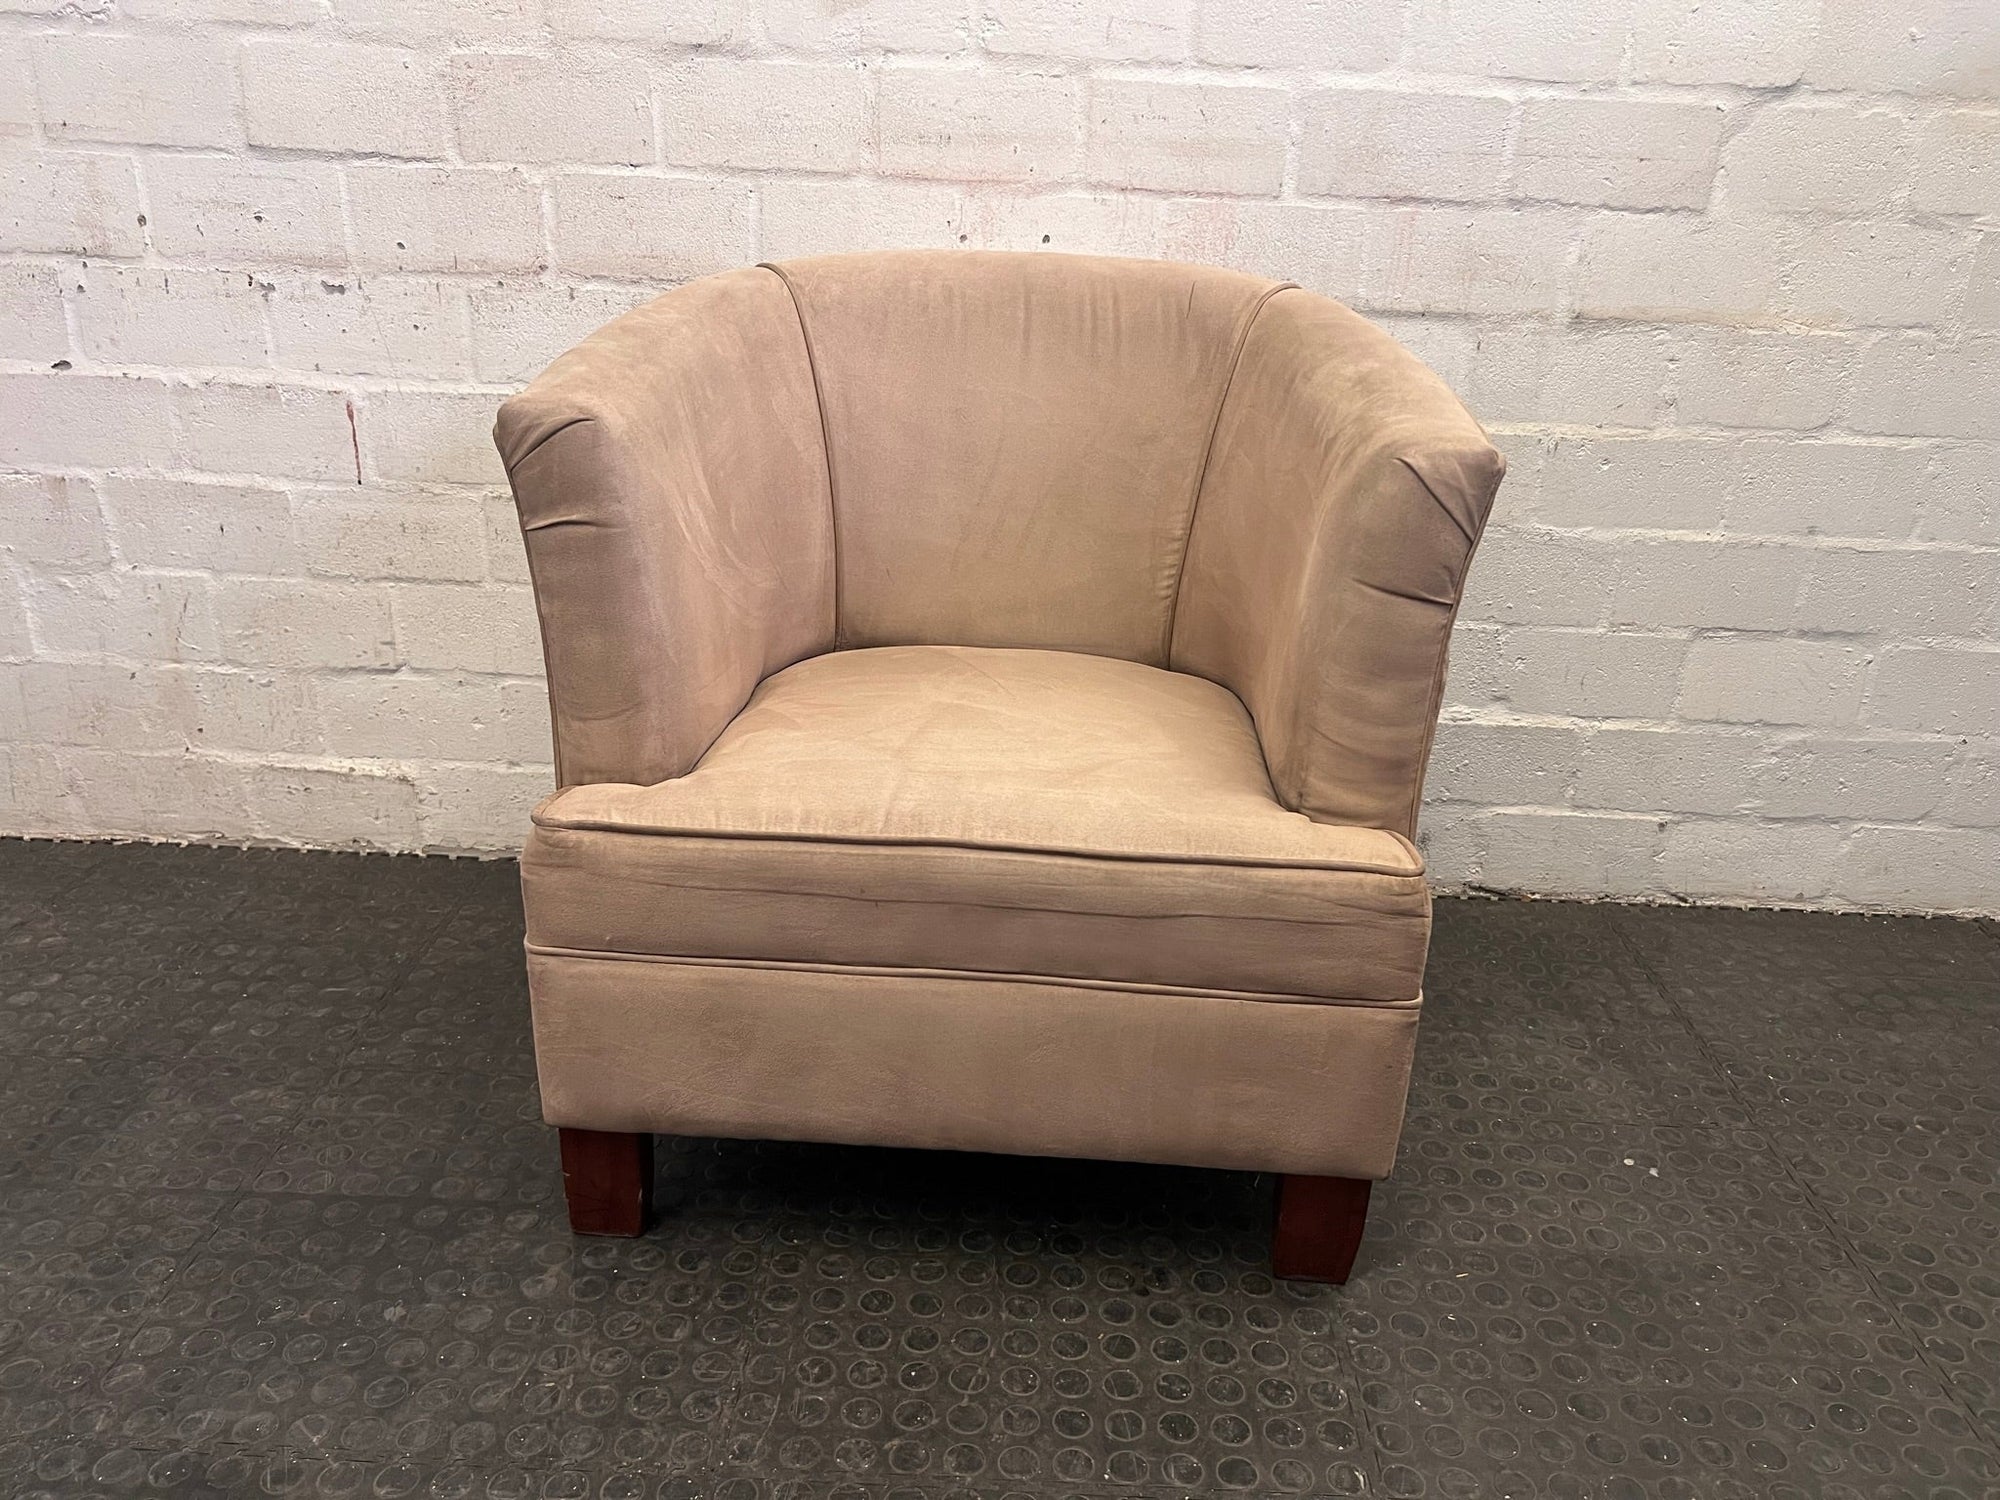 Beige Suede Single Seater Couch - REDUCED